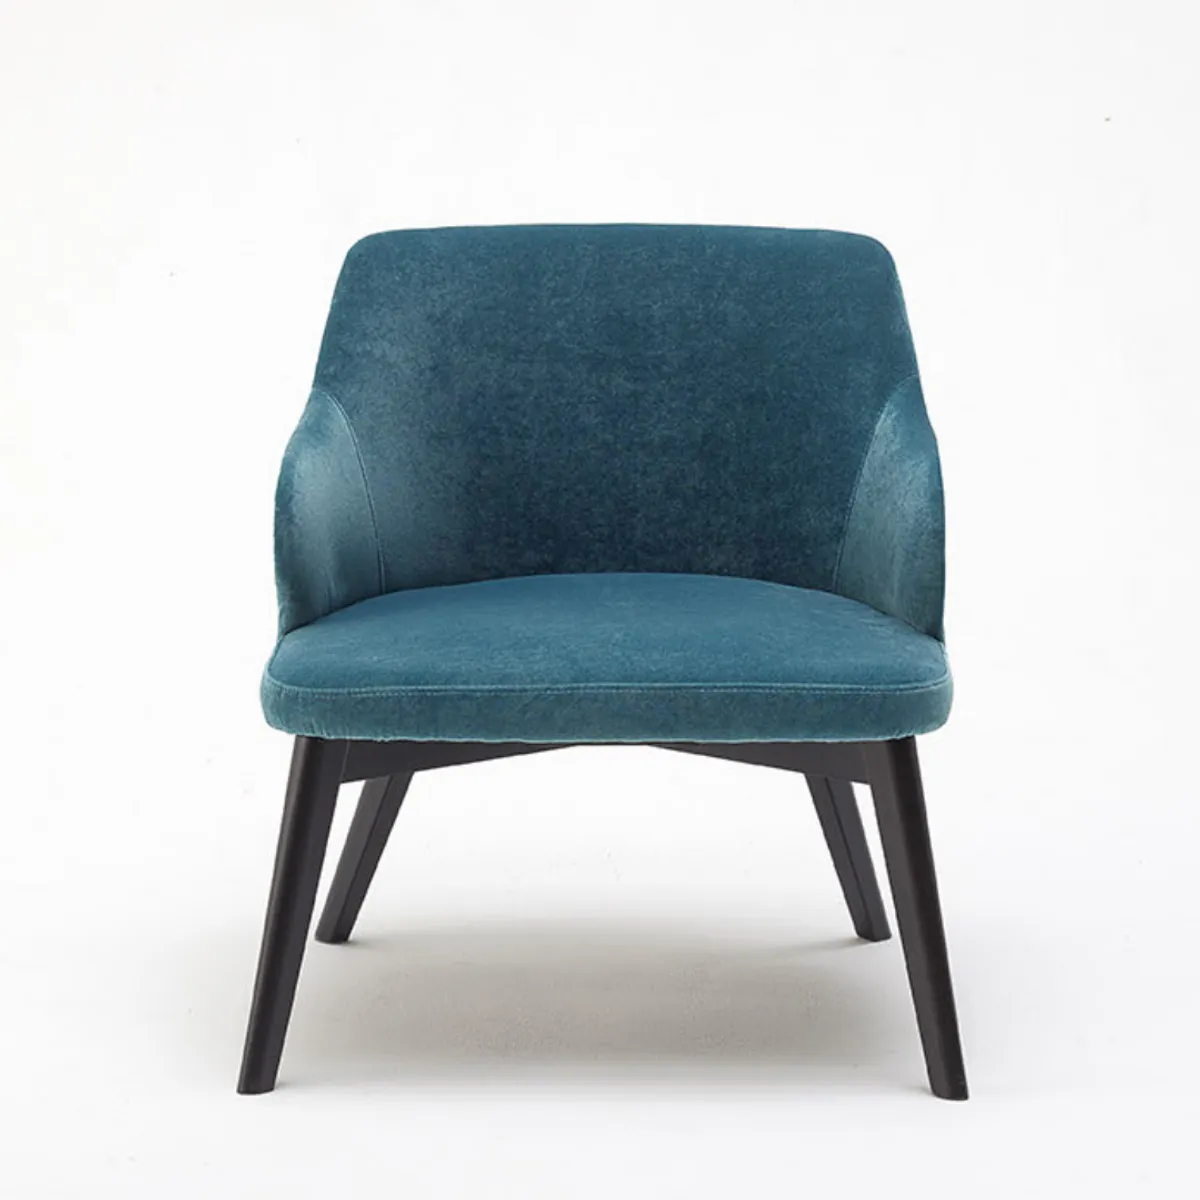 Colette lounge chair 1